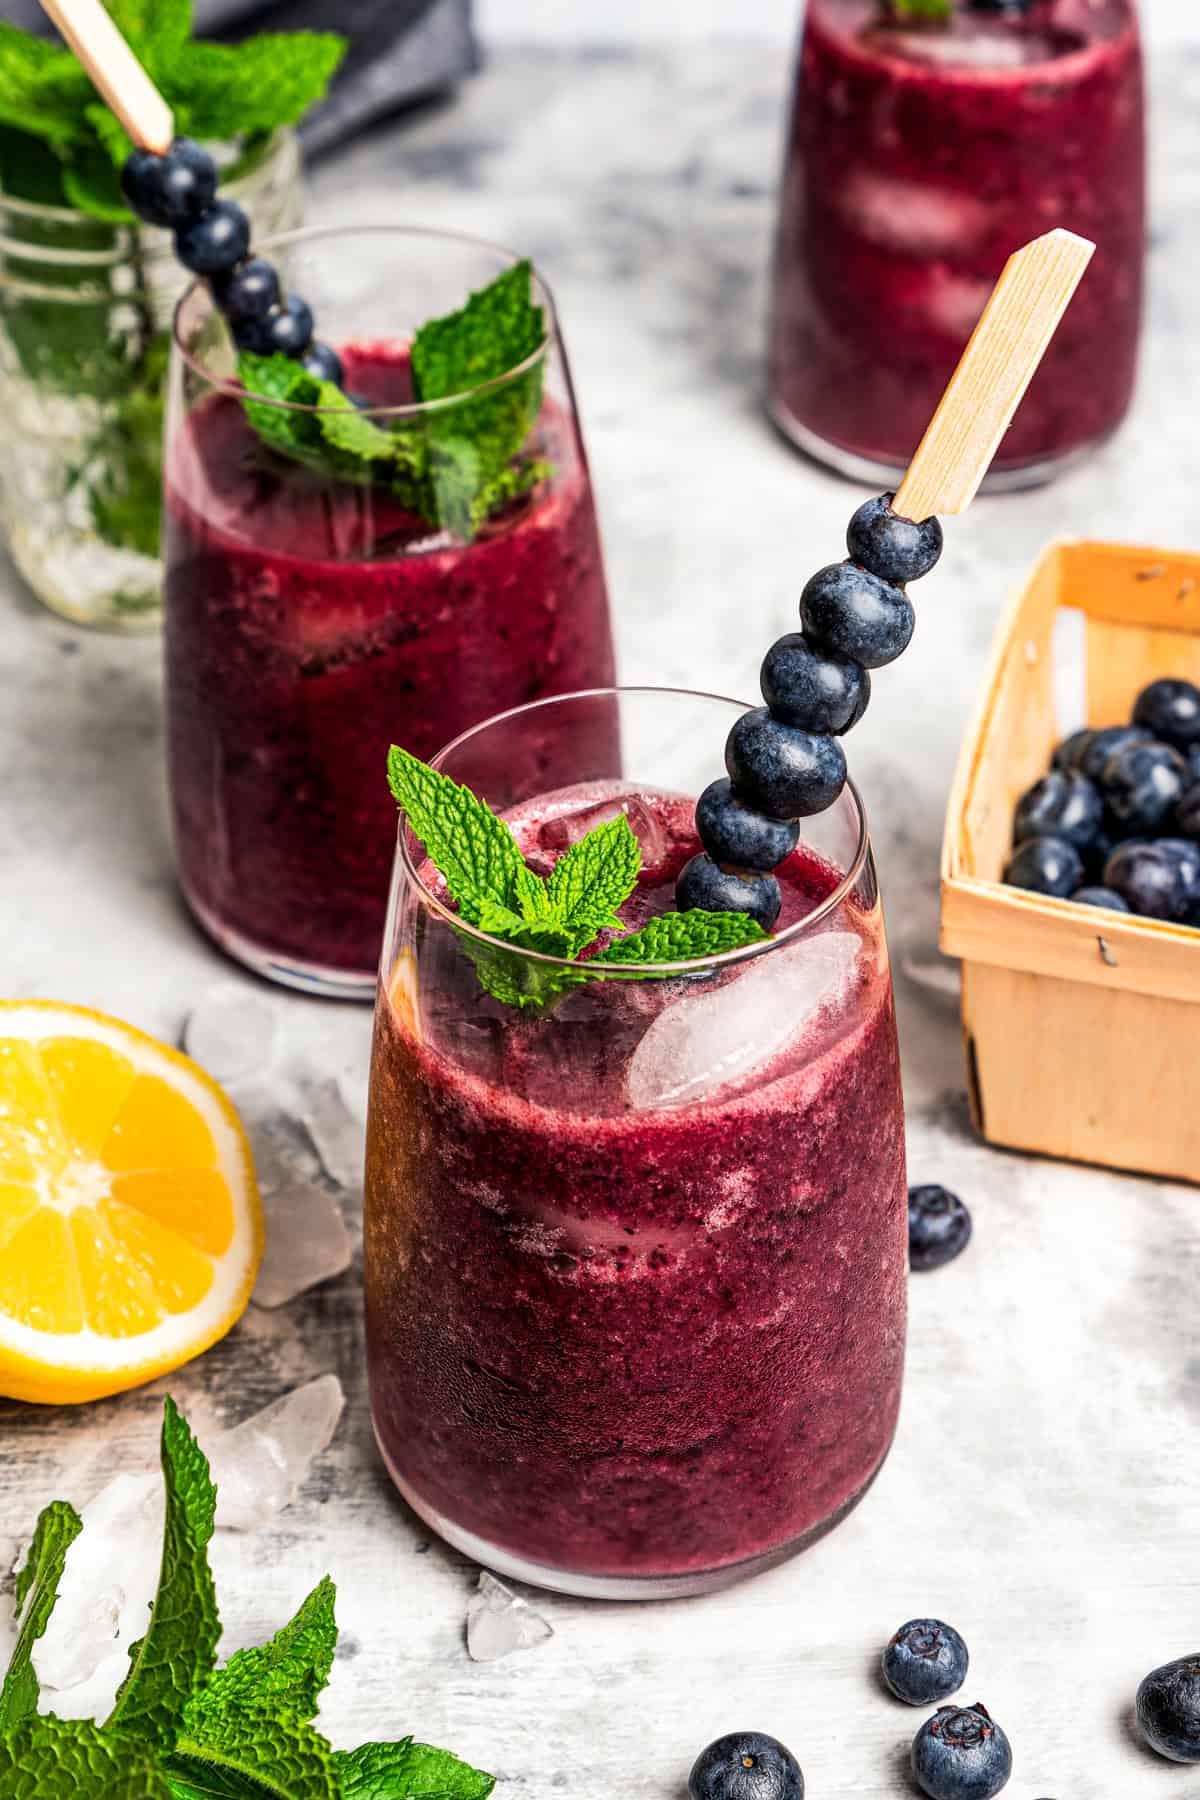 A glass of agua fresca garnished with fresh mint and berries is set next to a tub of blueberries and half a lemon, with two more glasses in the background.